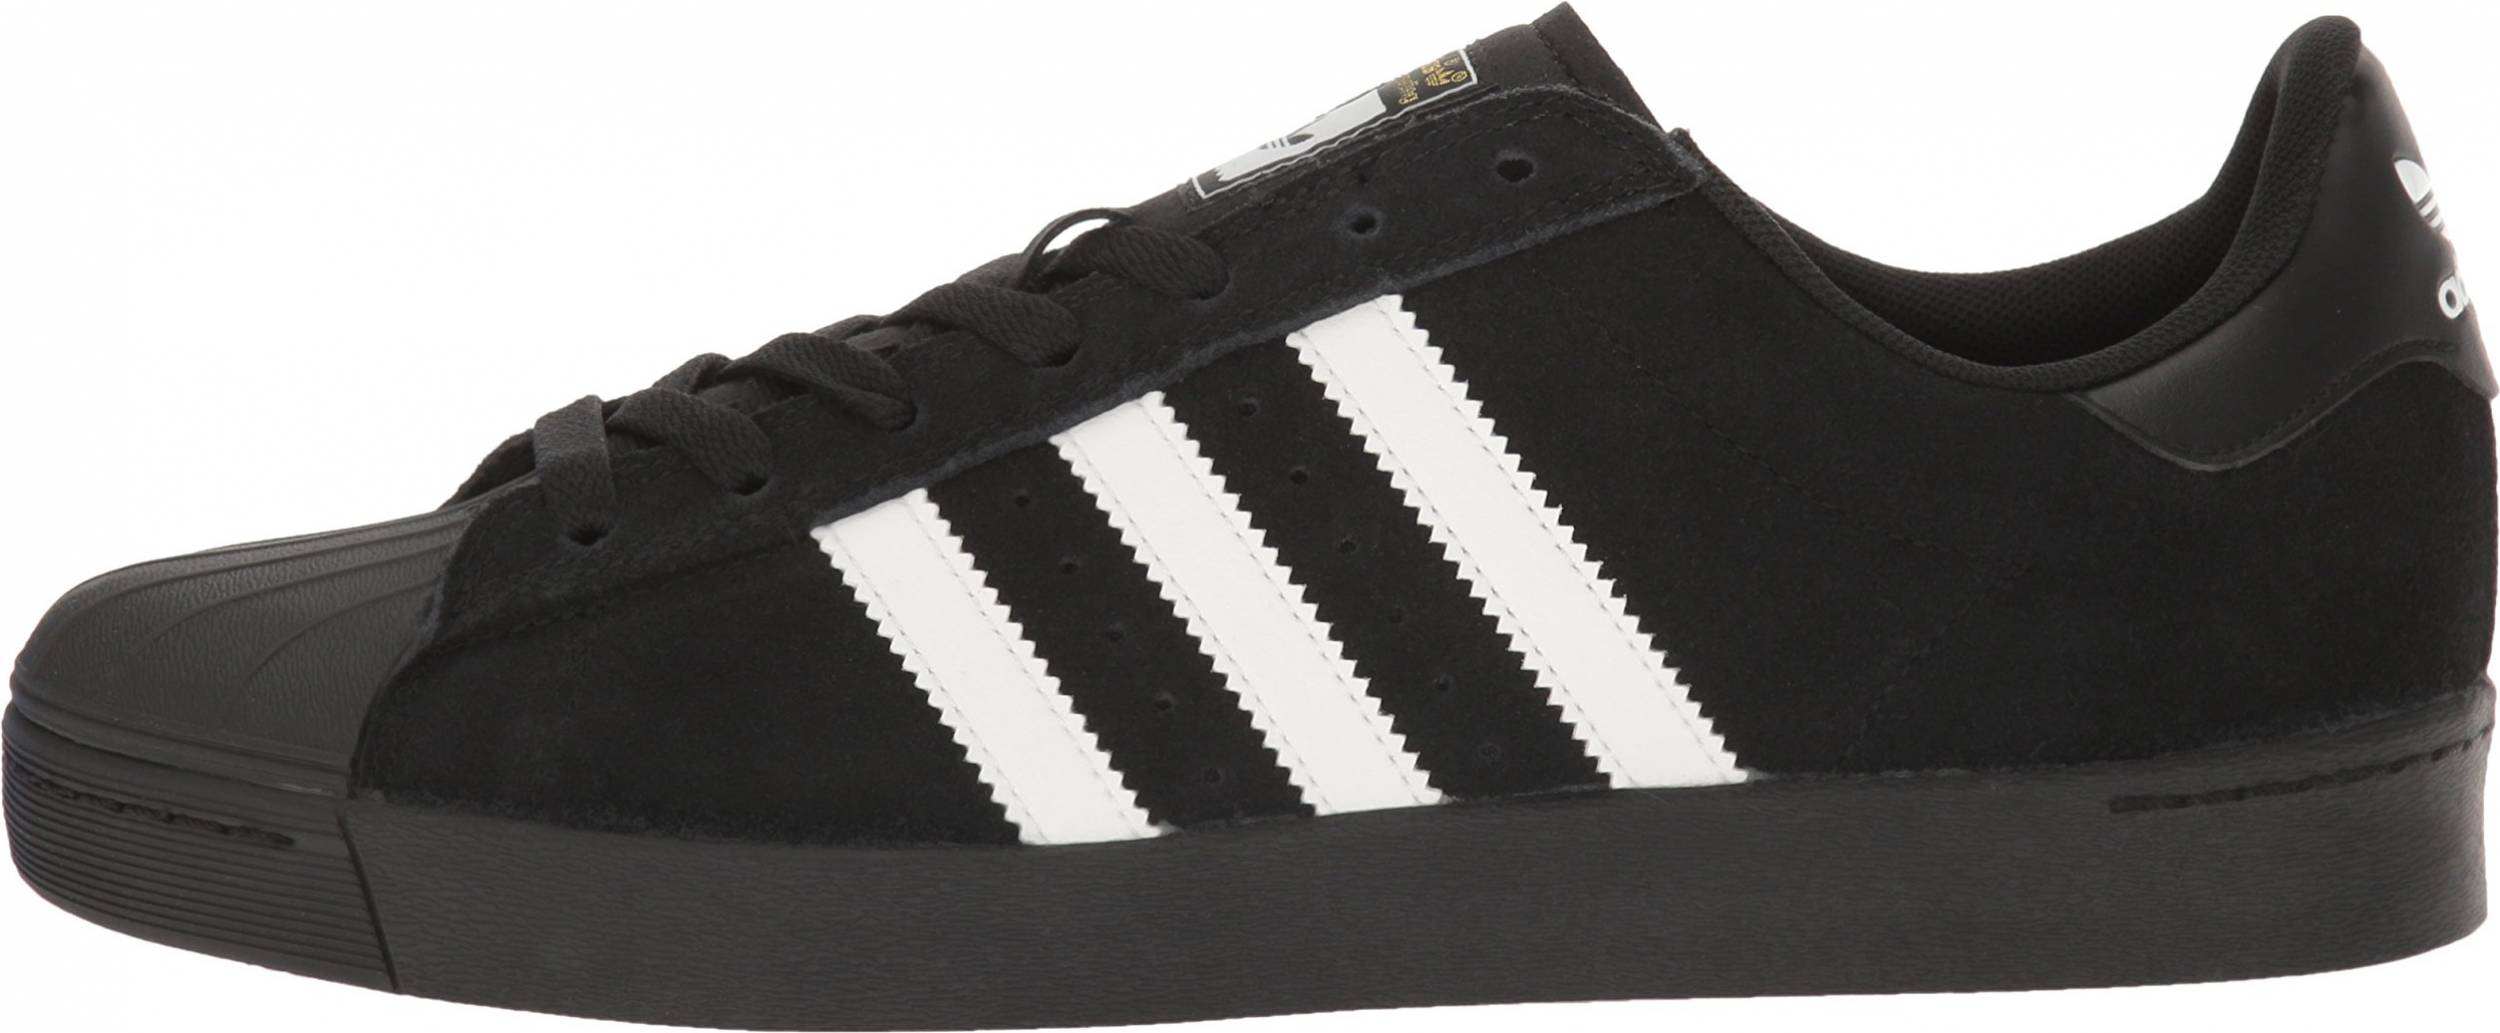 Save 52% on Adidas Skate Sneakers (77 